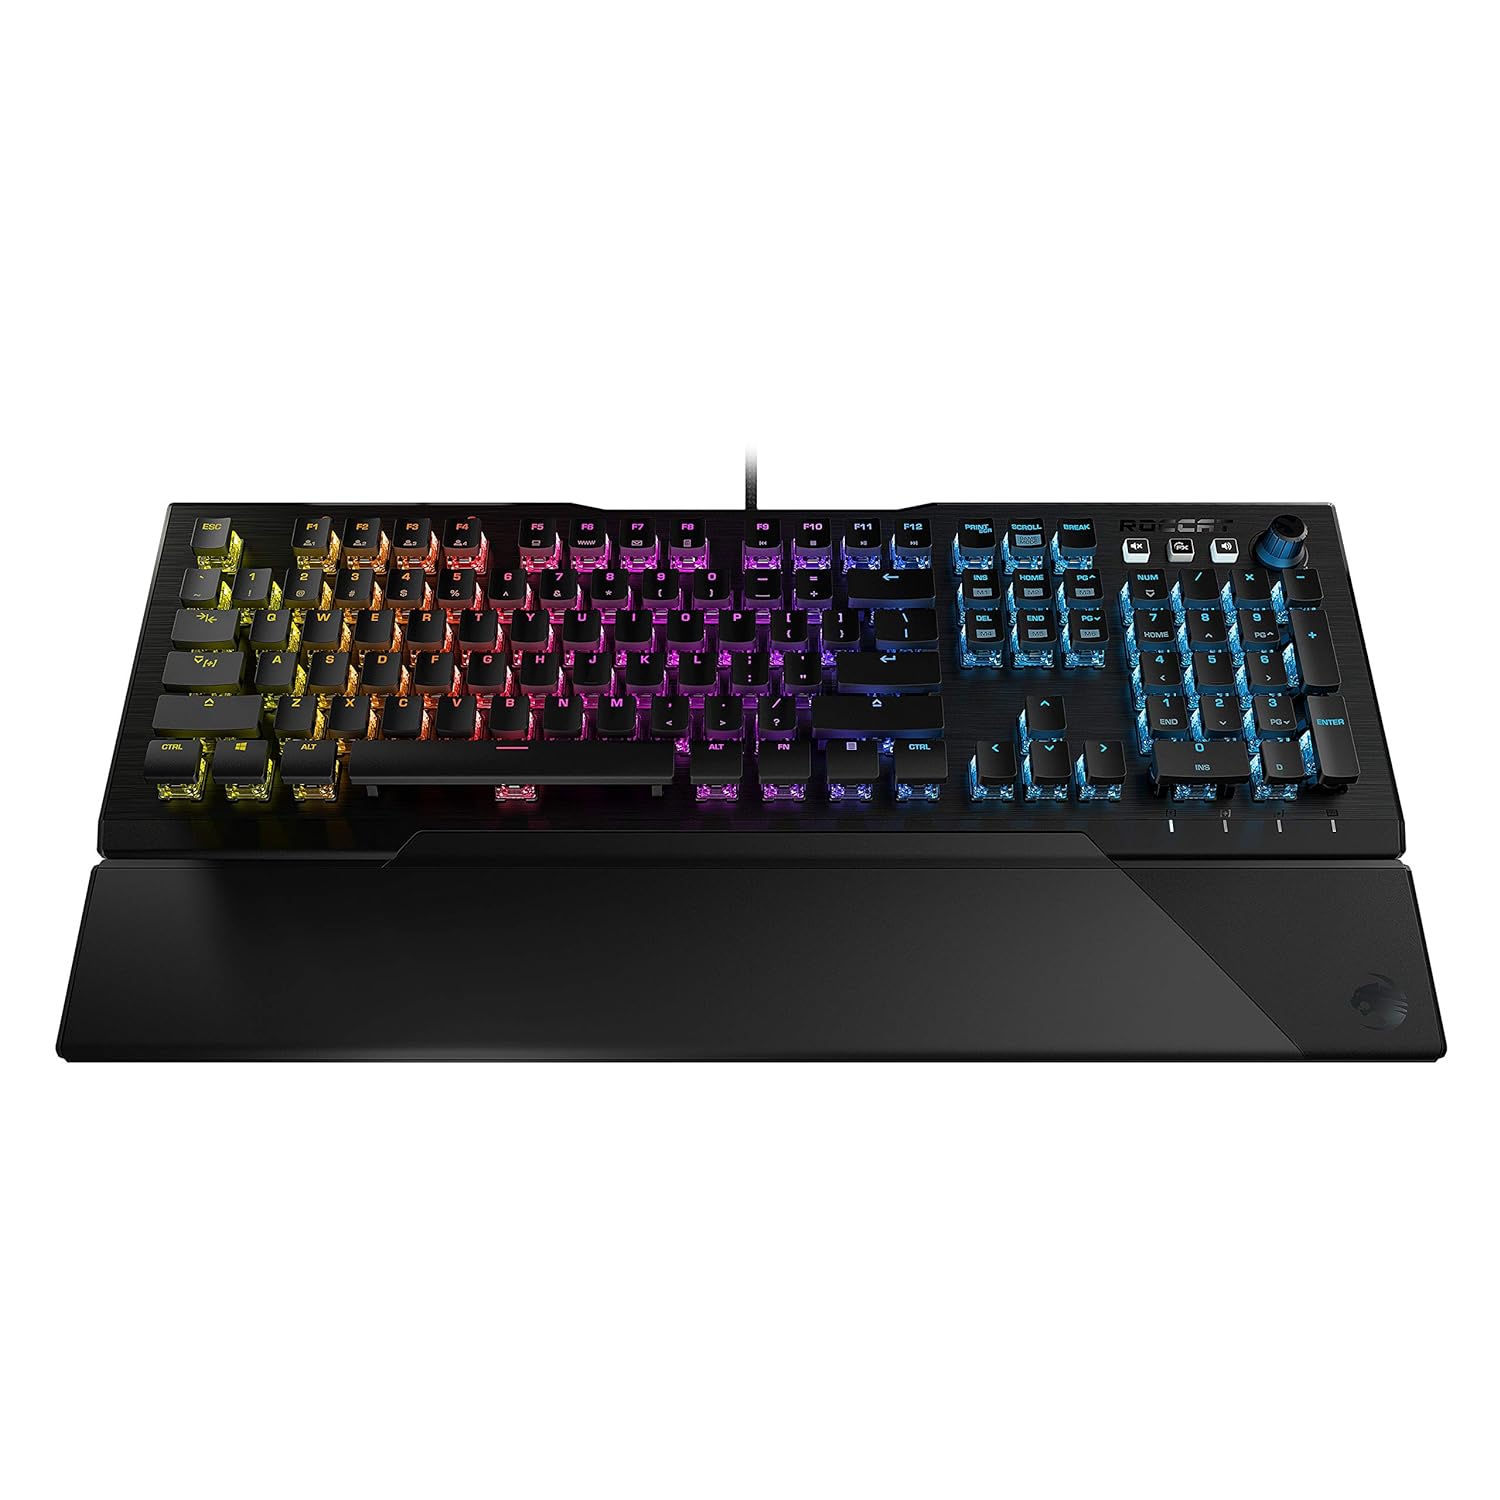 ROCCAT Vulcan 121 Aimo RGB Mechanical Gaming Keyboard - Red Switches